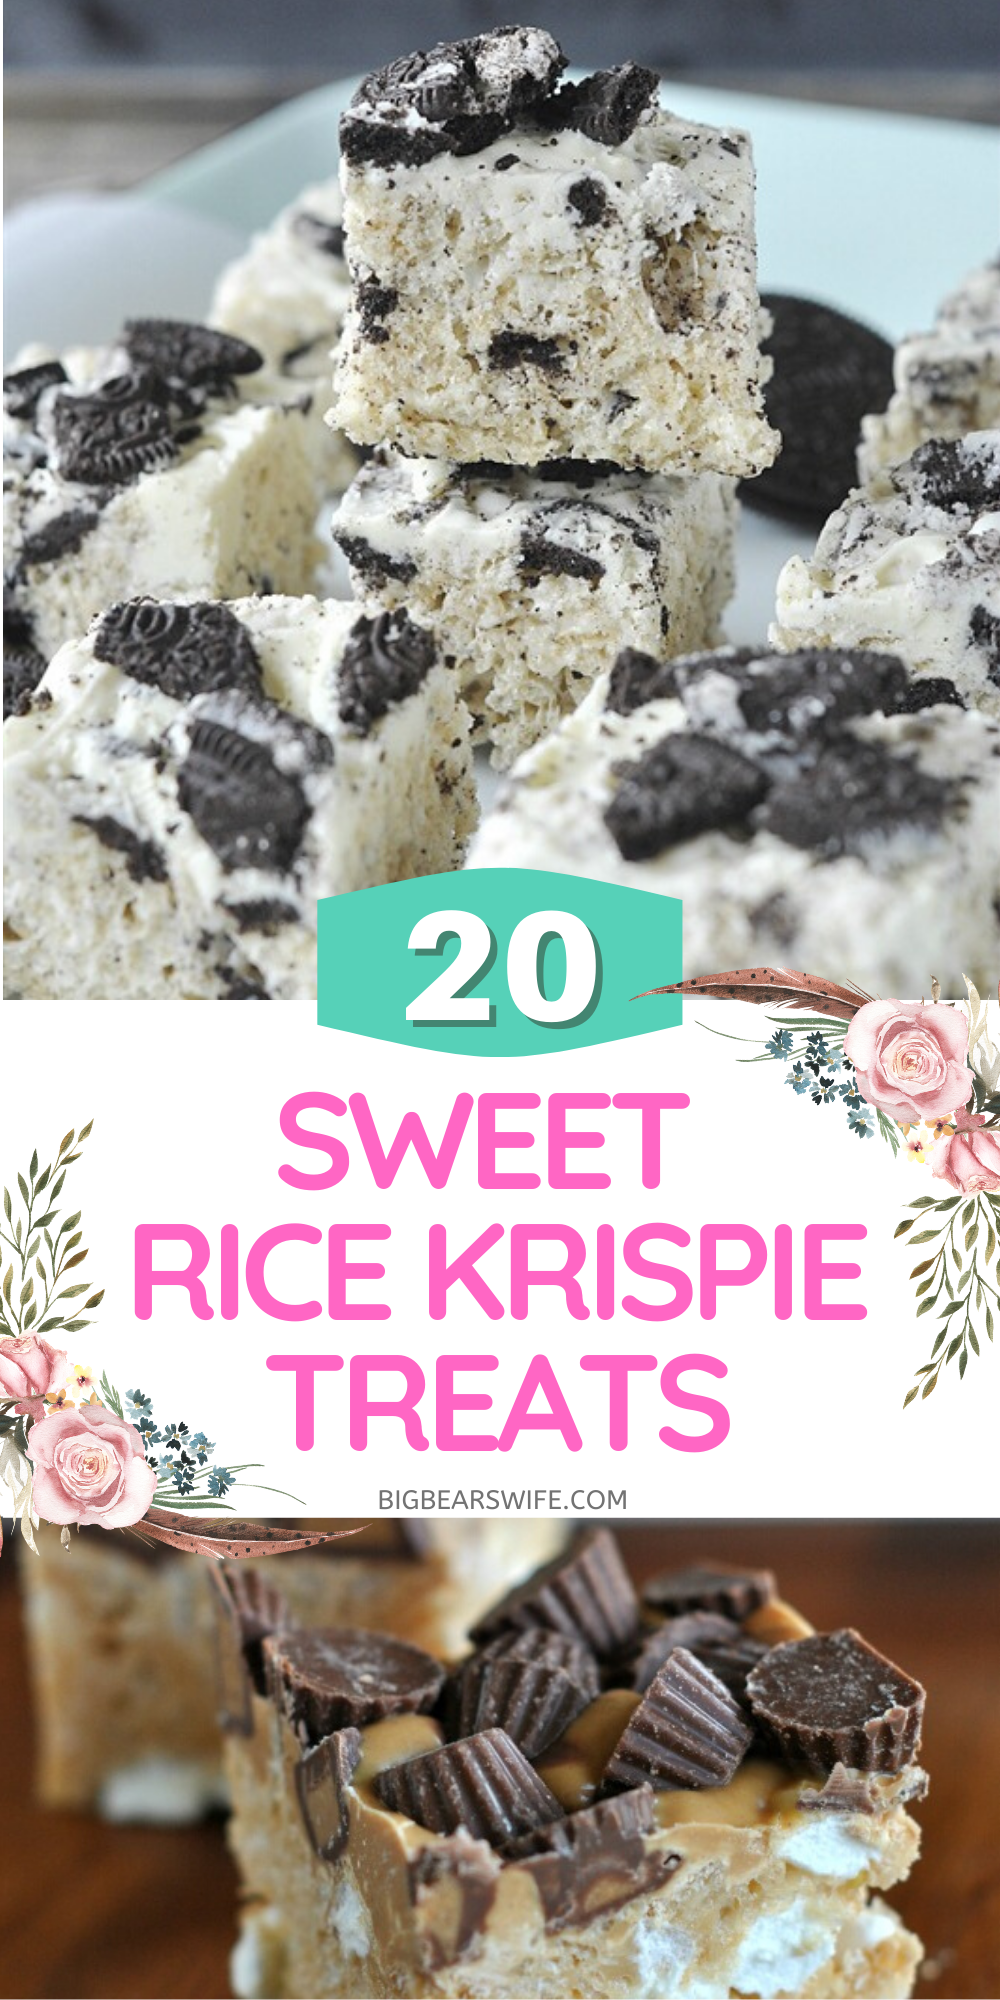 Cereal, Melted Marshmallows and Butter pressed into a perfect little treat! What could be better than a homemade rice krispie treat? If you love rice kripsie treats, I can't wait for you to see these 20 Sweet Rice Krispie Treats recipes! via @bigbearswife